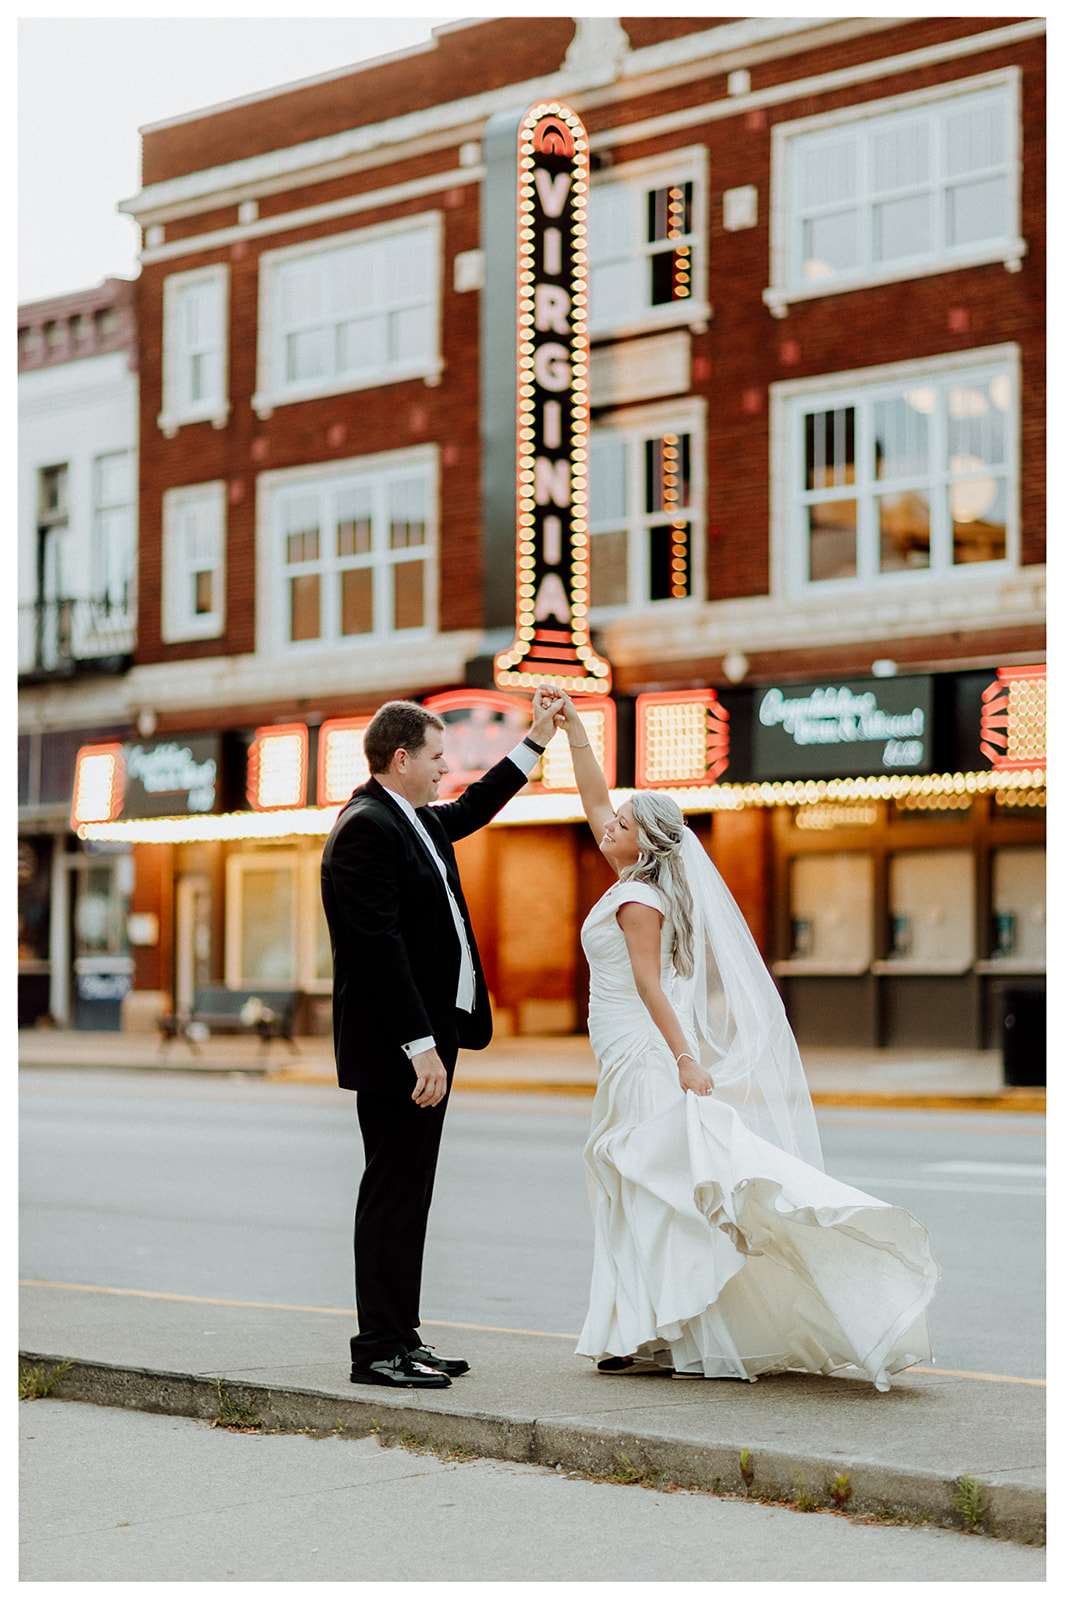 The beautiful wedding at the historic Virginia Theater in downtown Somerset Kentucky on July 1st 2023.  